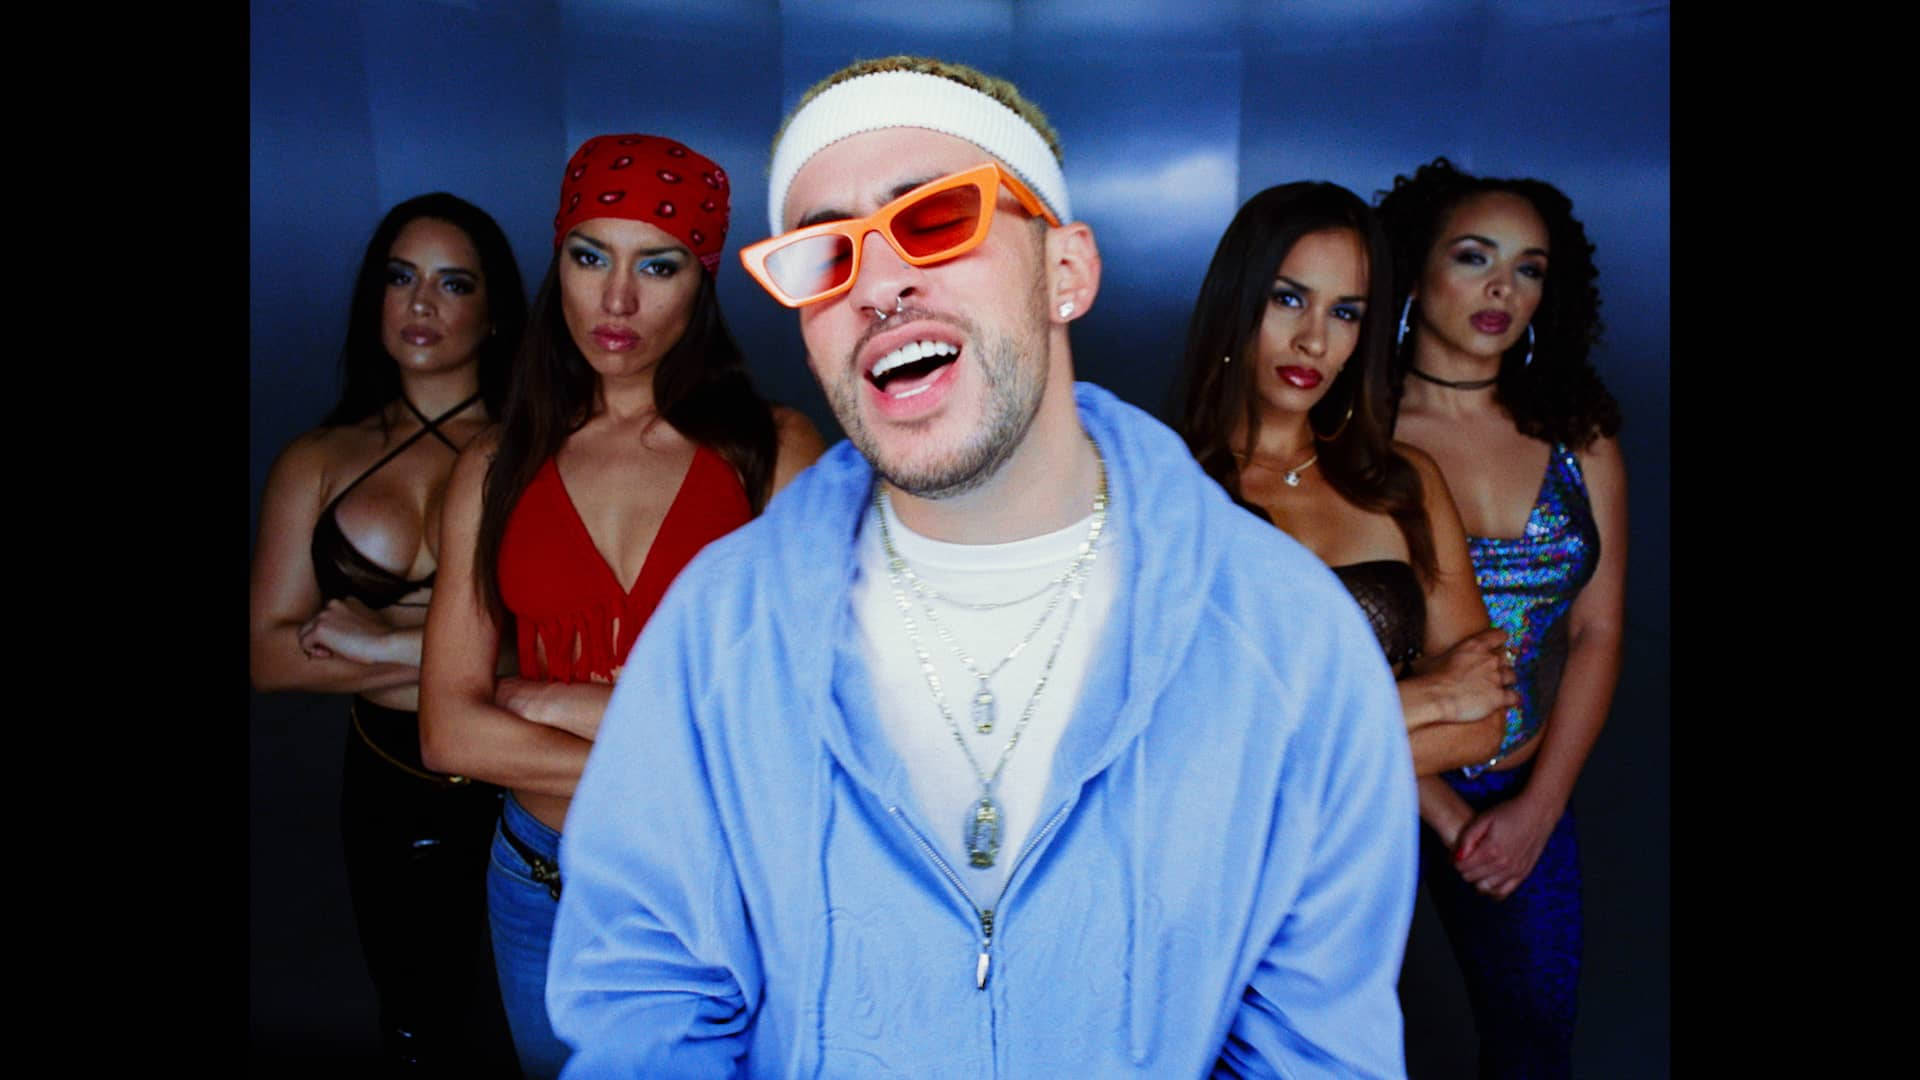 Bad Bunny 1920X1080 Wallpaper and Background Image